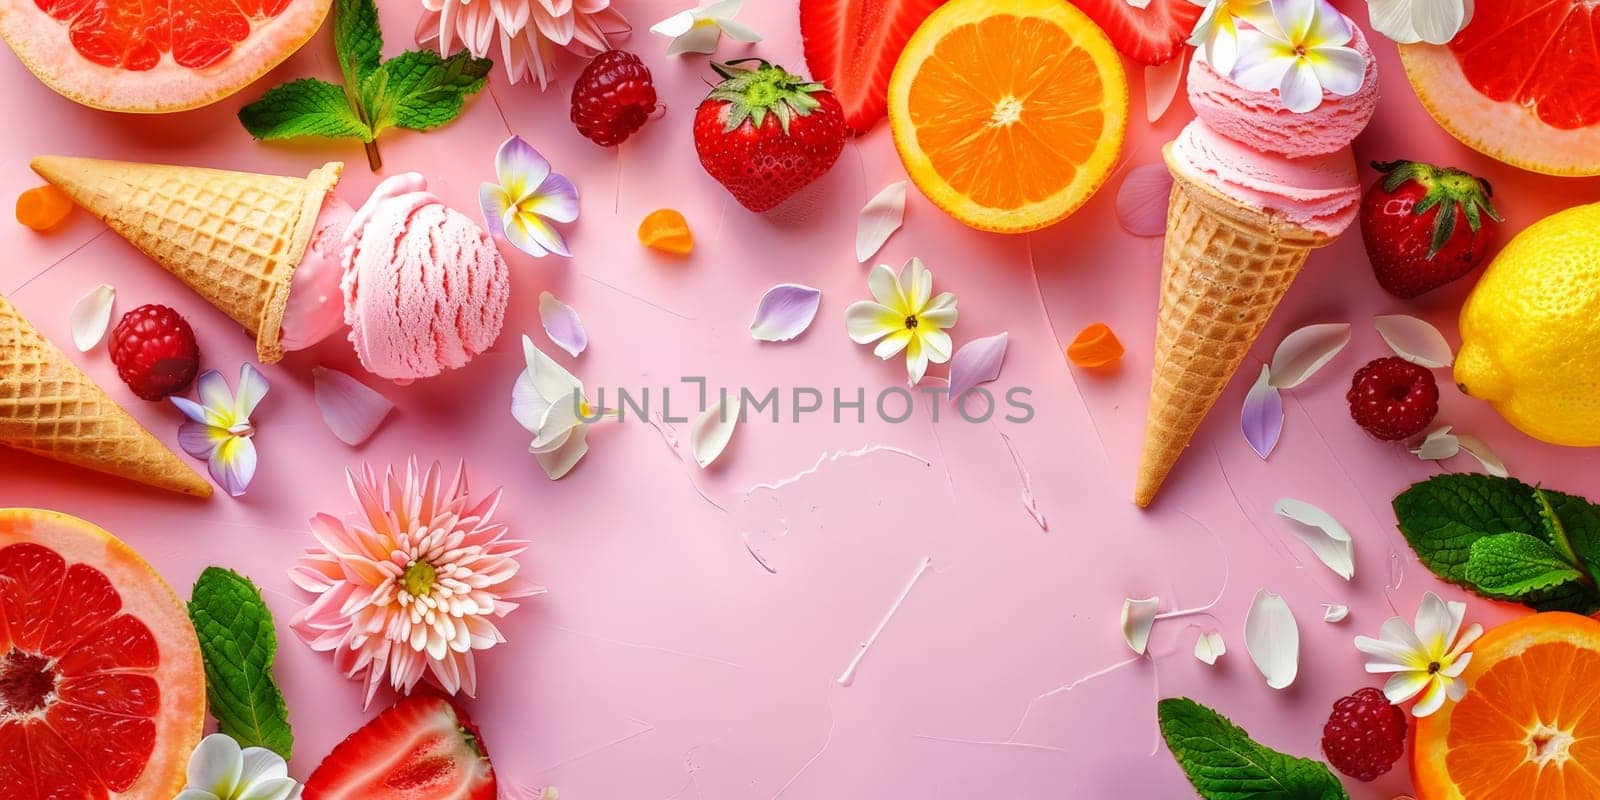 A colorful display of fruit and ice cream on a pink background. The ice cream is in a cone and surrounded by strawberries, oranges, and raspberries. Concept of fun and indulgence